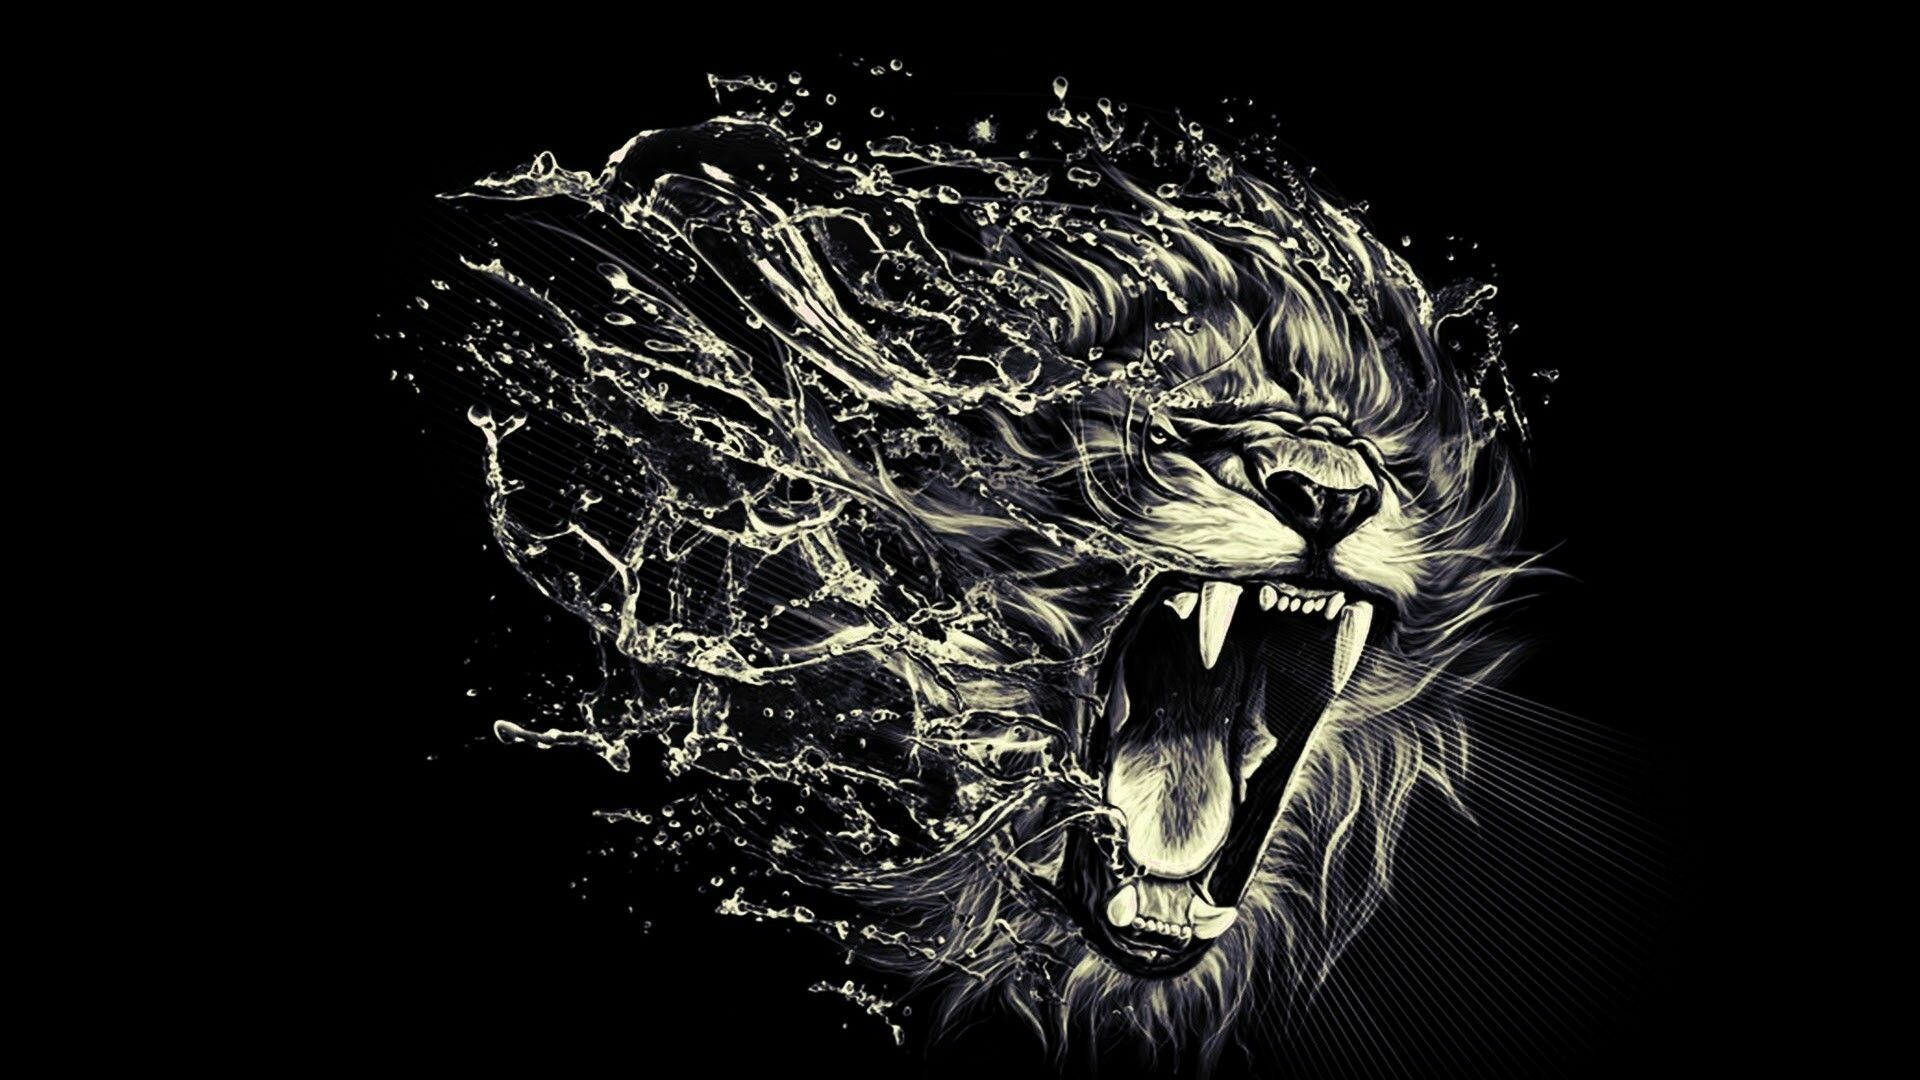 Cool Lion Wallpaper: HD, 4K, 5K for PC and Mobile. Download free image for iPhone, Android